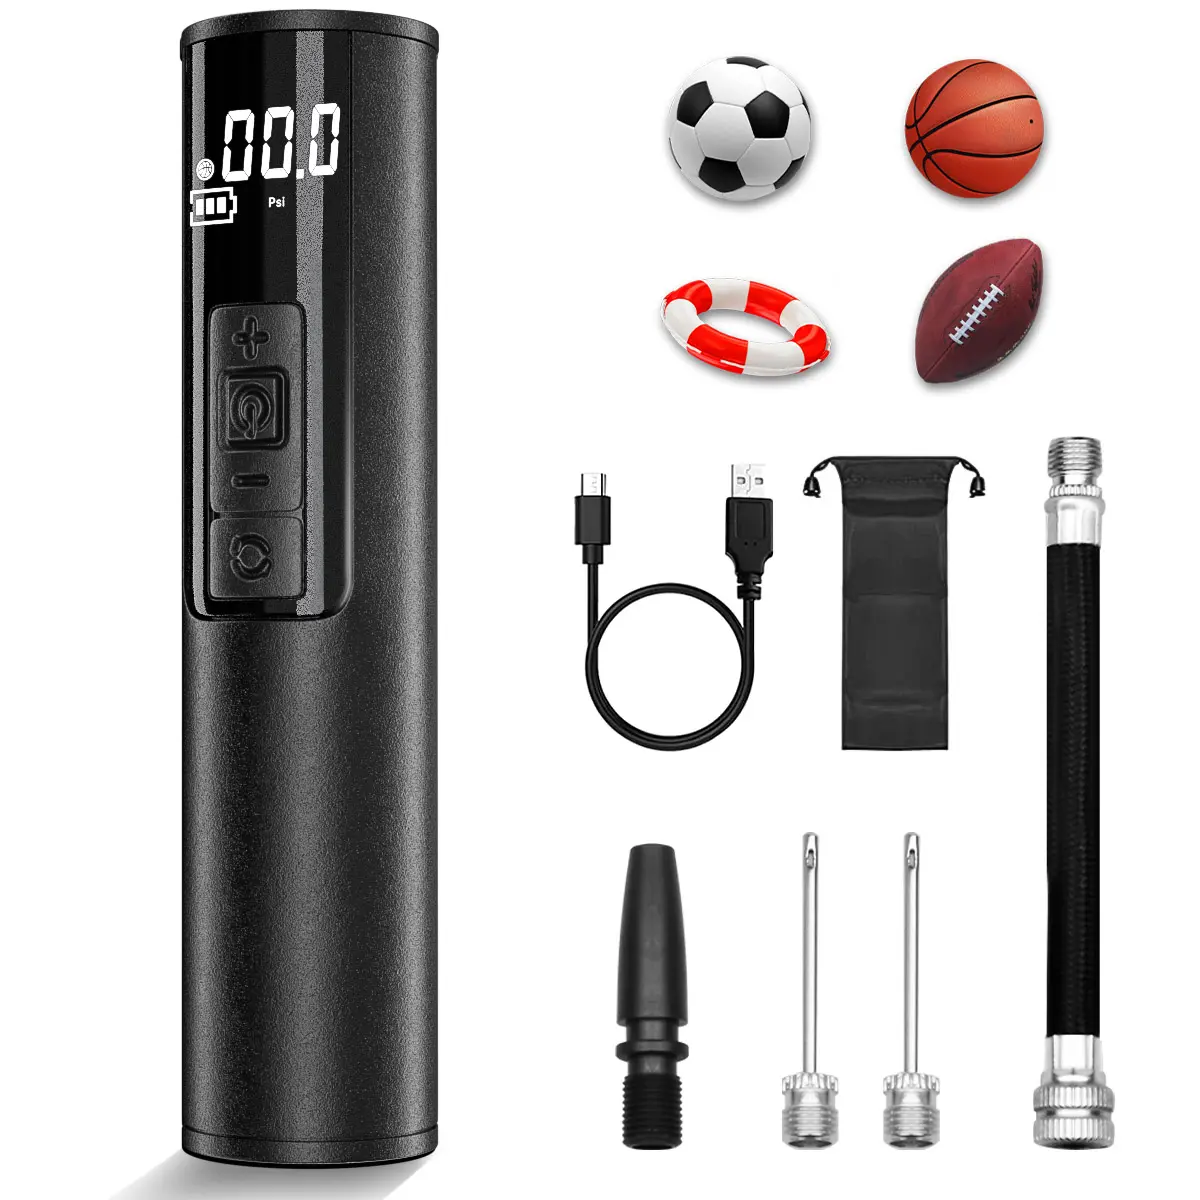 Electric Ball Pump, Smart Air Pump Portable Fast Ball Inflation with Precise Pressure Gauge for Sport Balls Football Basketball